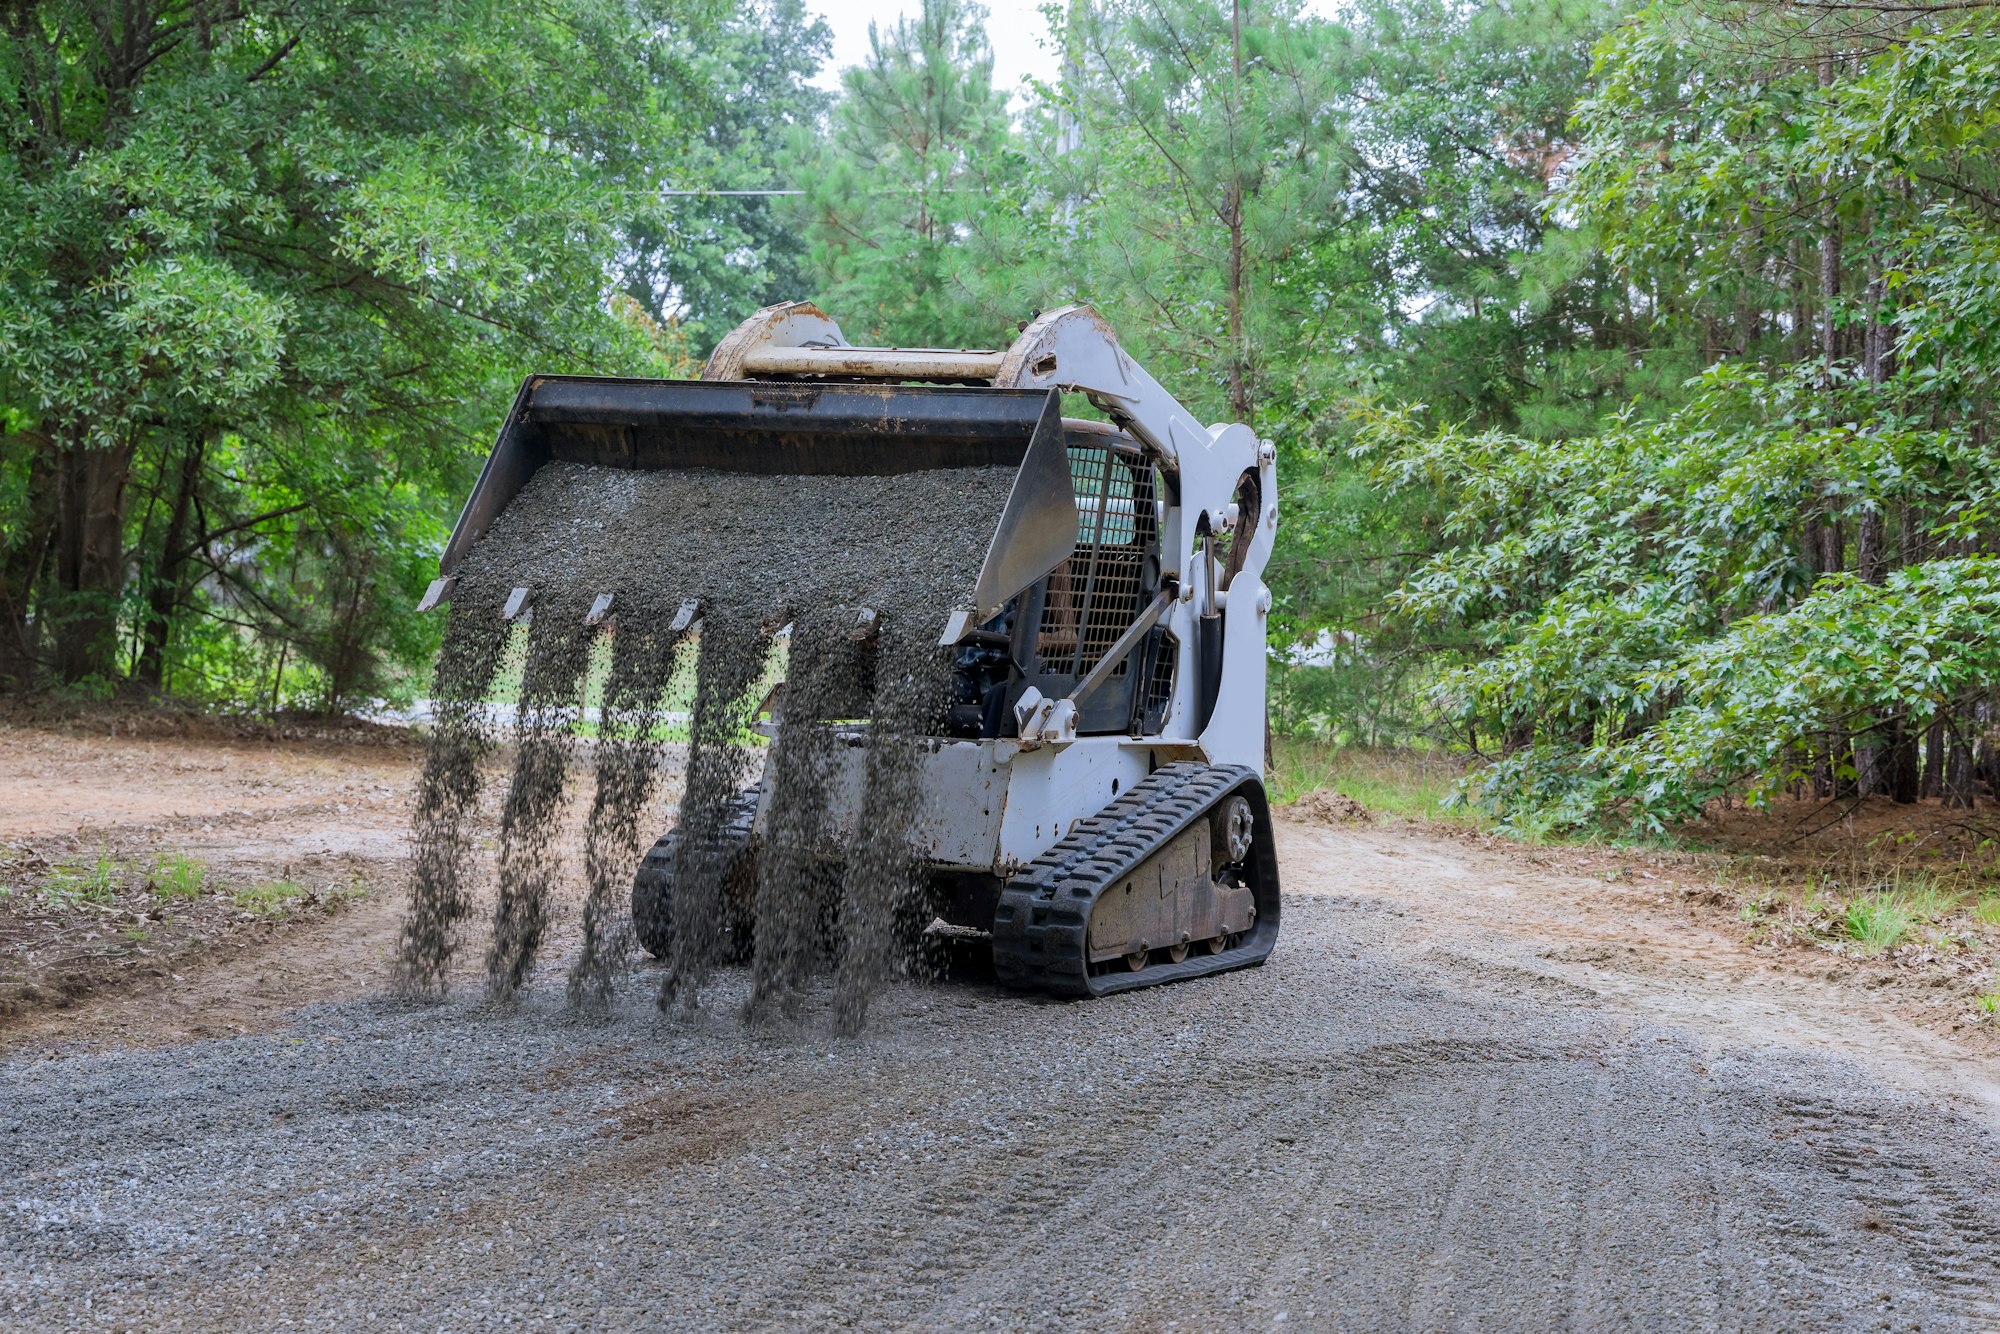 The Bobcat tractor moves and unloads gravel on the old road reconstruction site